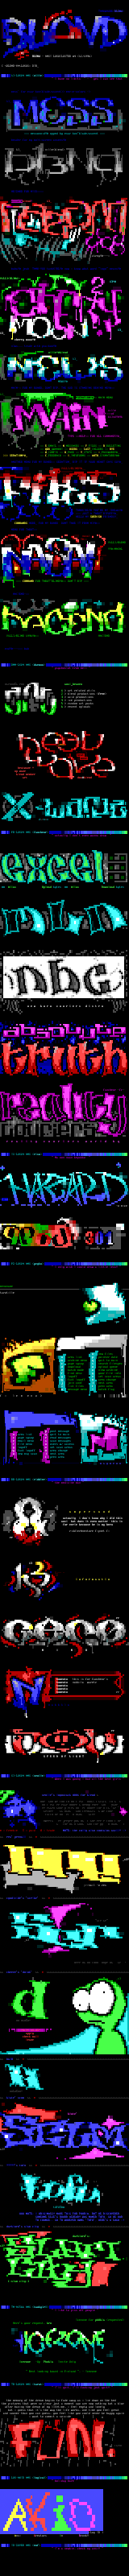 ANSI logocluster 12/96 by multiple artists